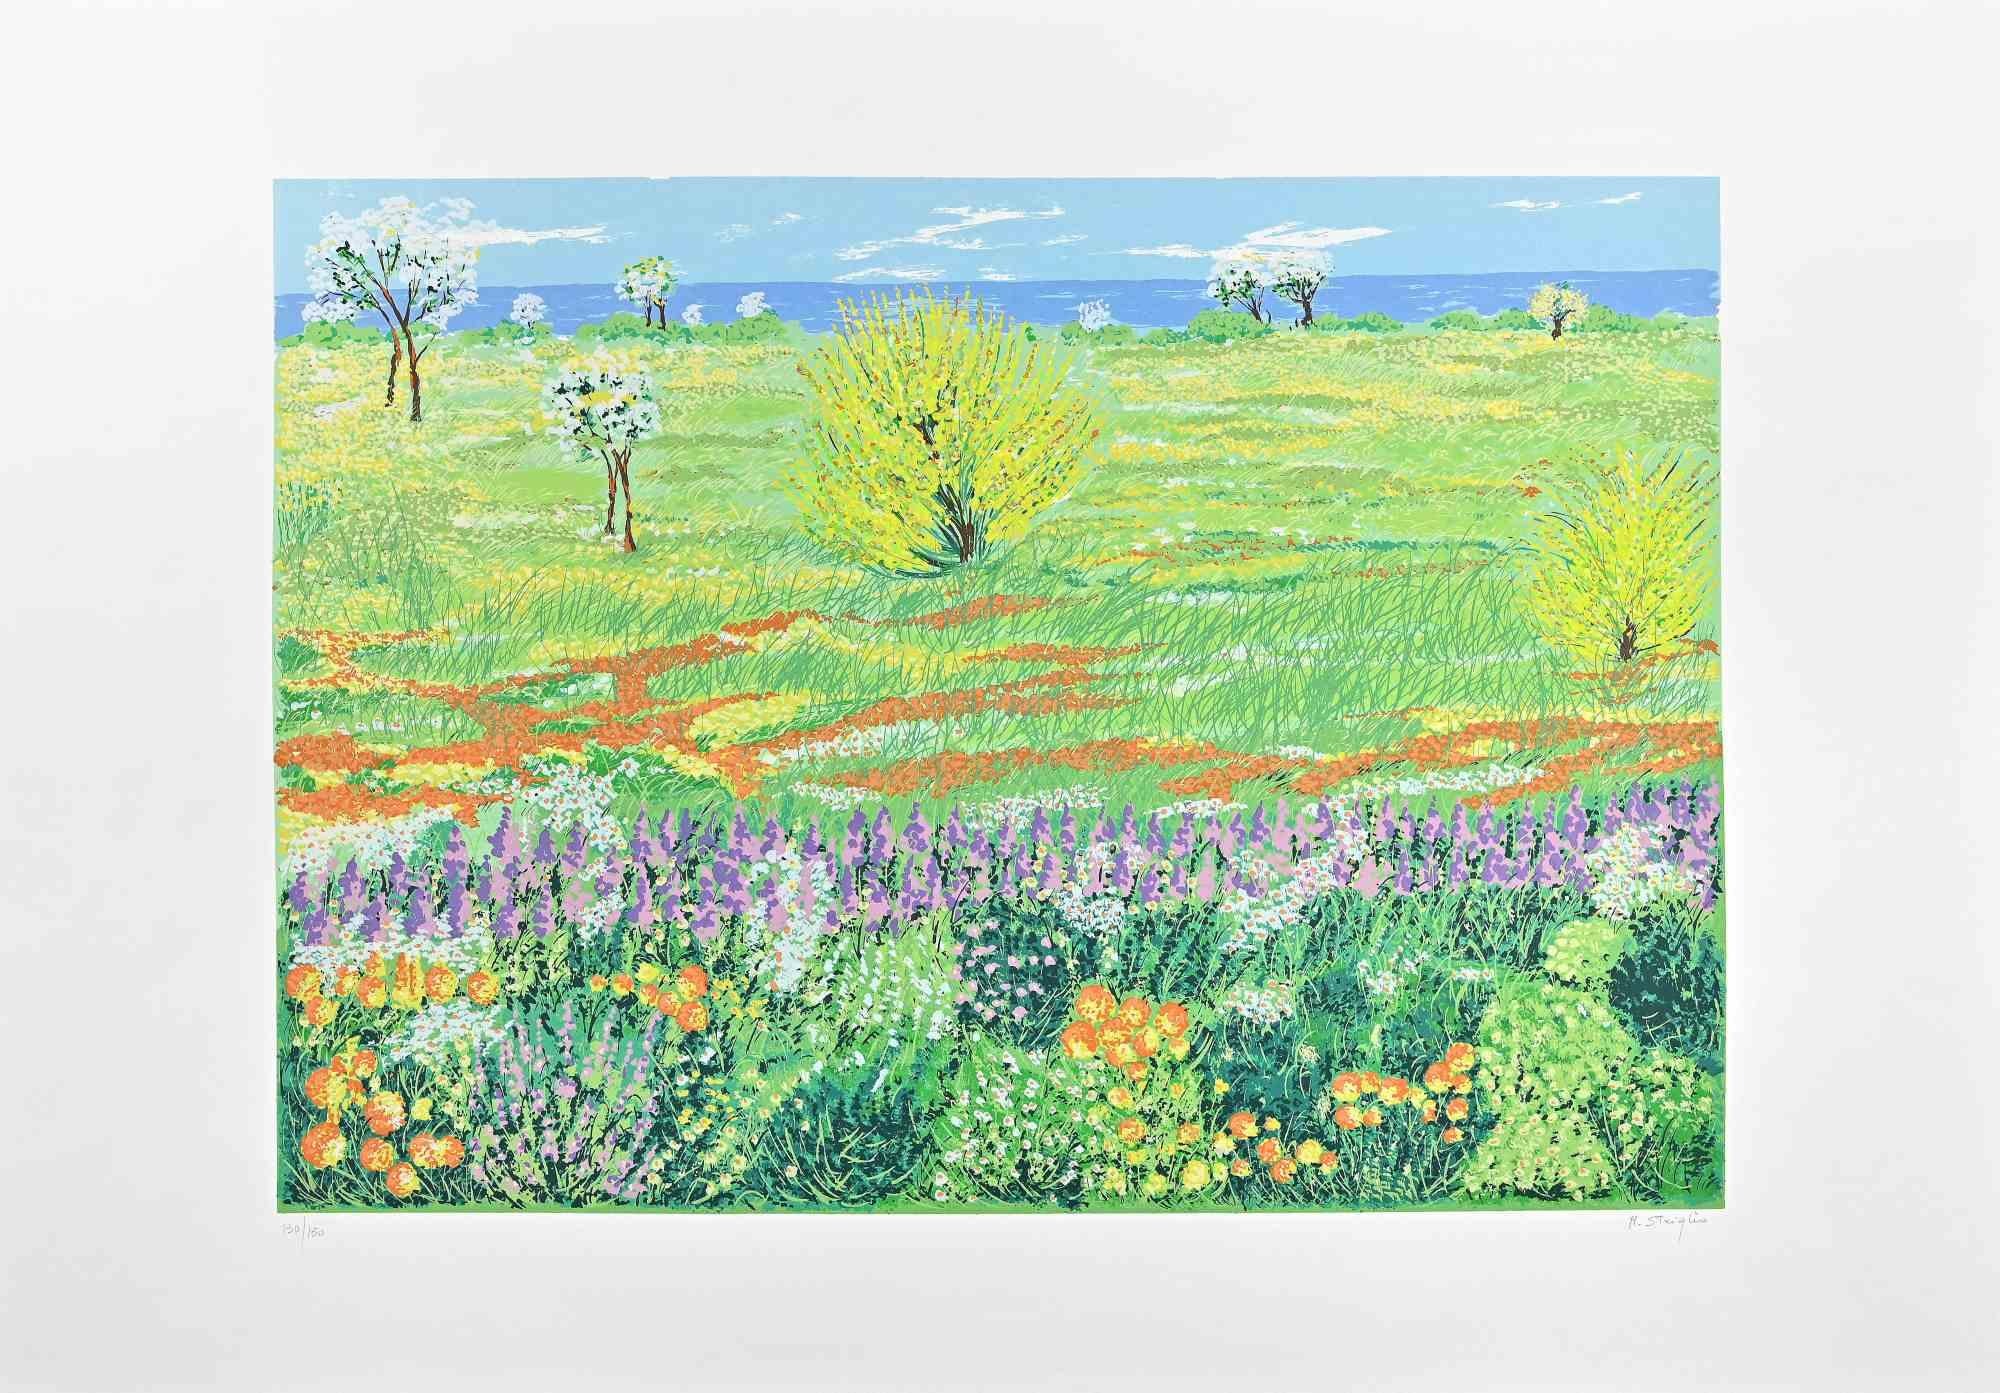 Meadow in Spring - Screen Print by M. Striglio - Late 20th century